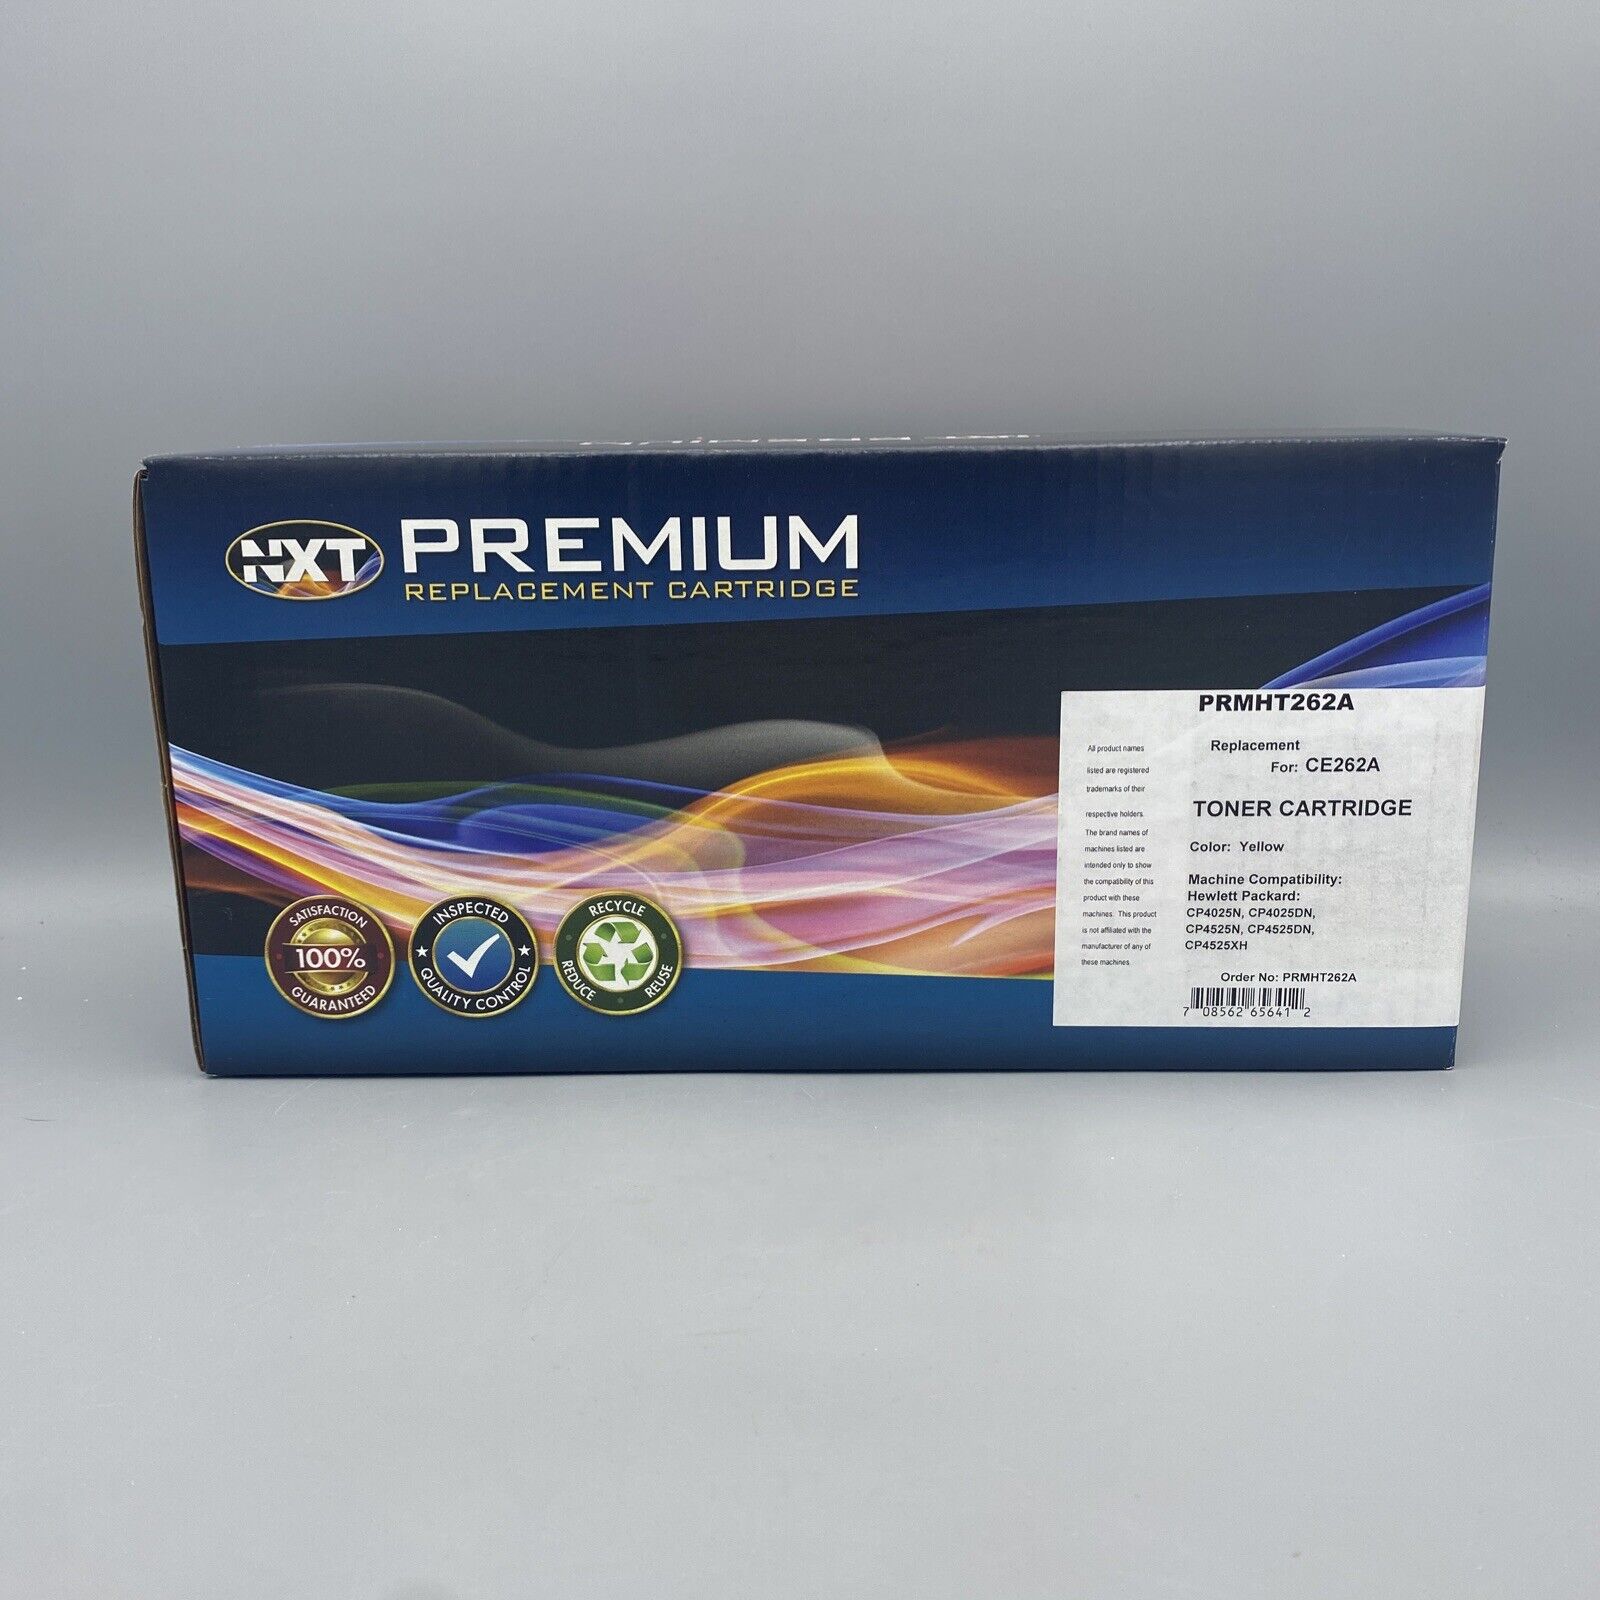 NXT Premium Replacement Cartridge PRMHT262A Yellow NEW